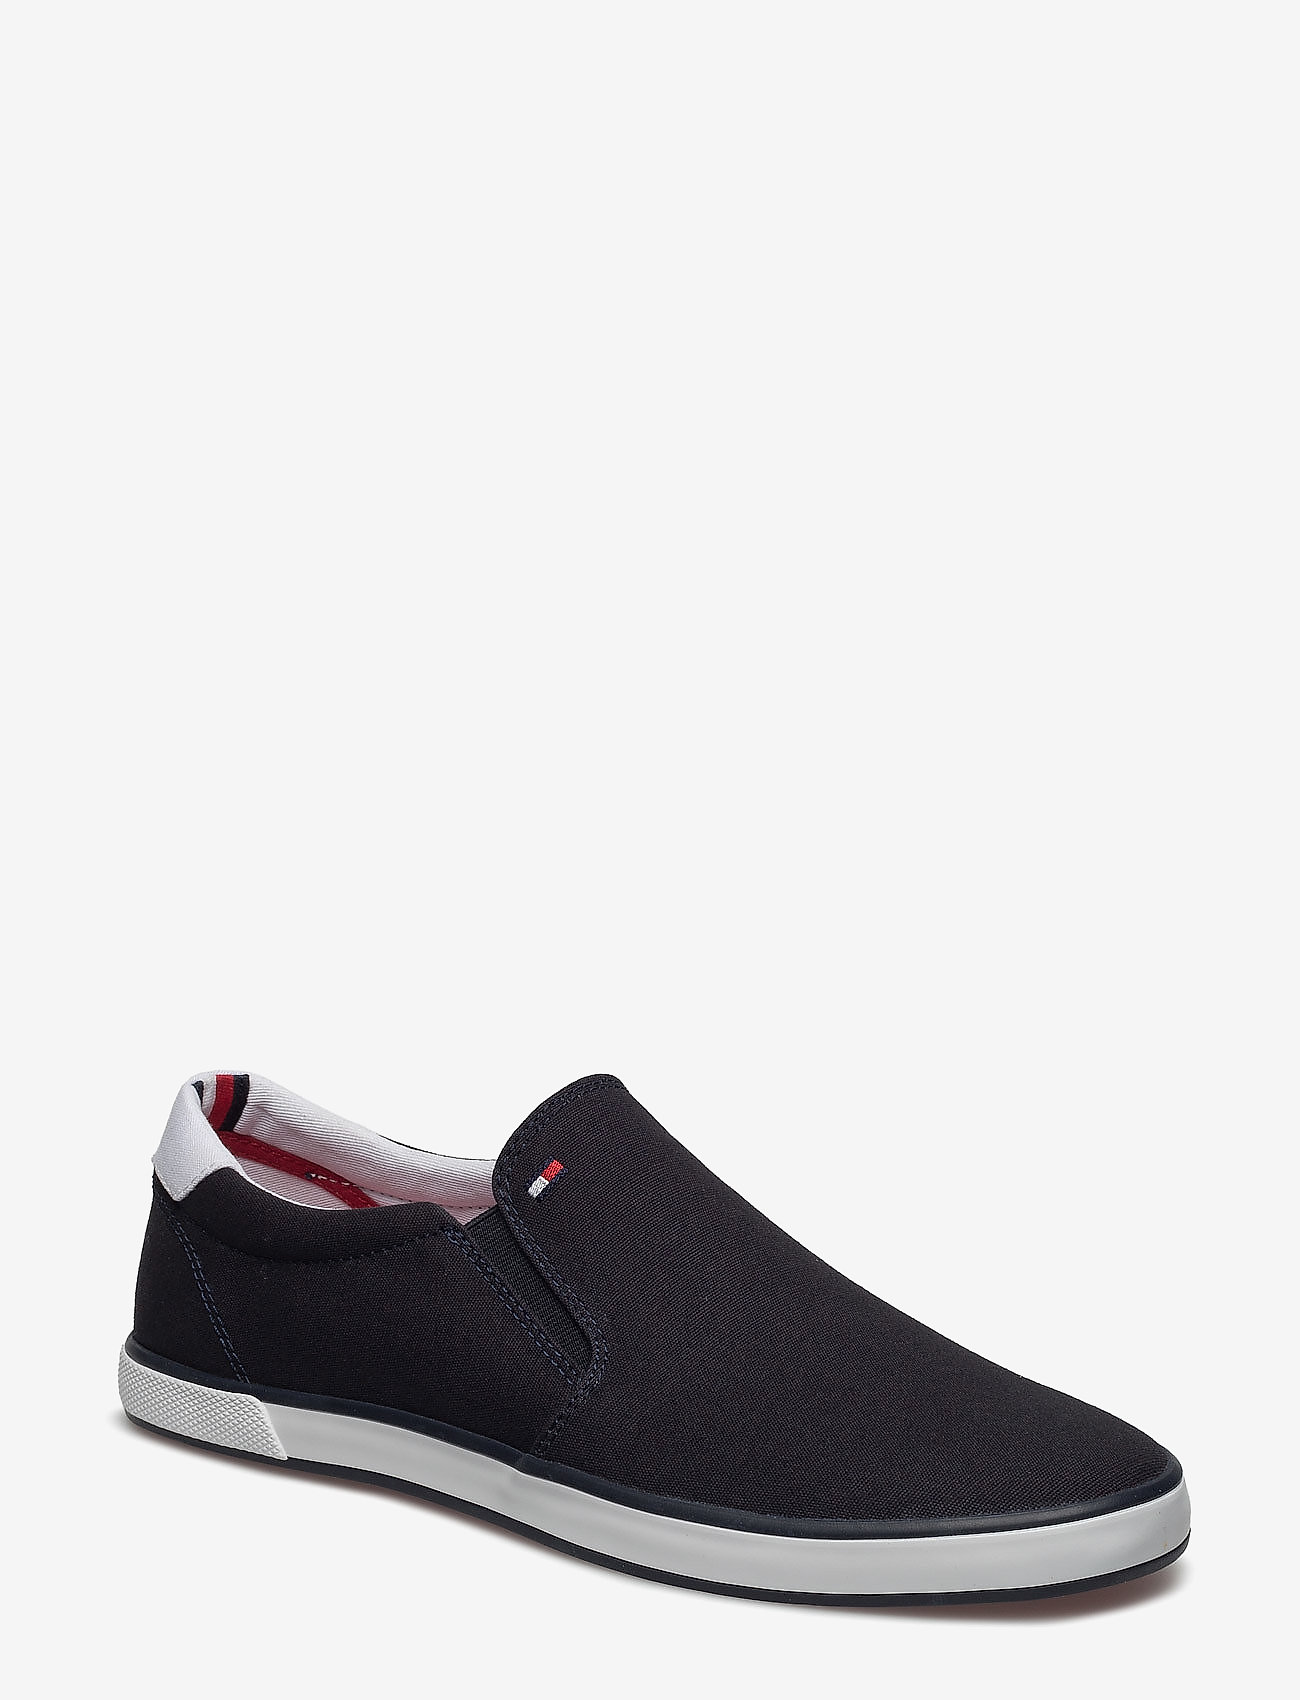 Tommy Hilfiger - ICONIC SLIP ON SNEAKER - slip on sneakers - midnight - 0